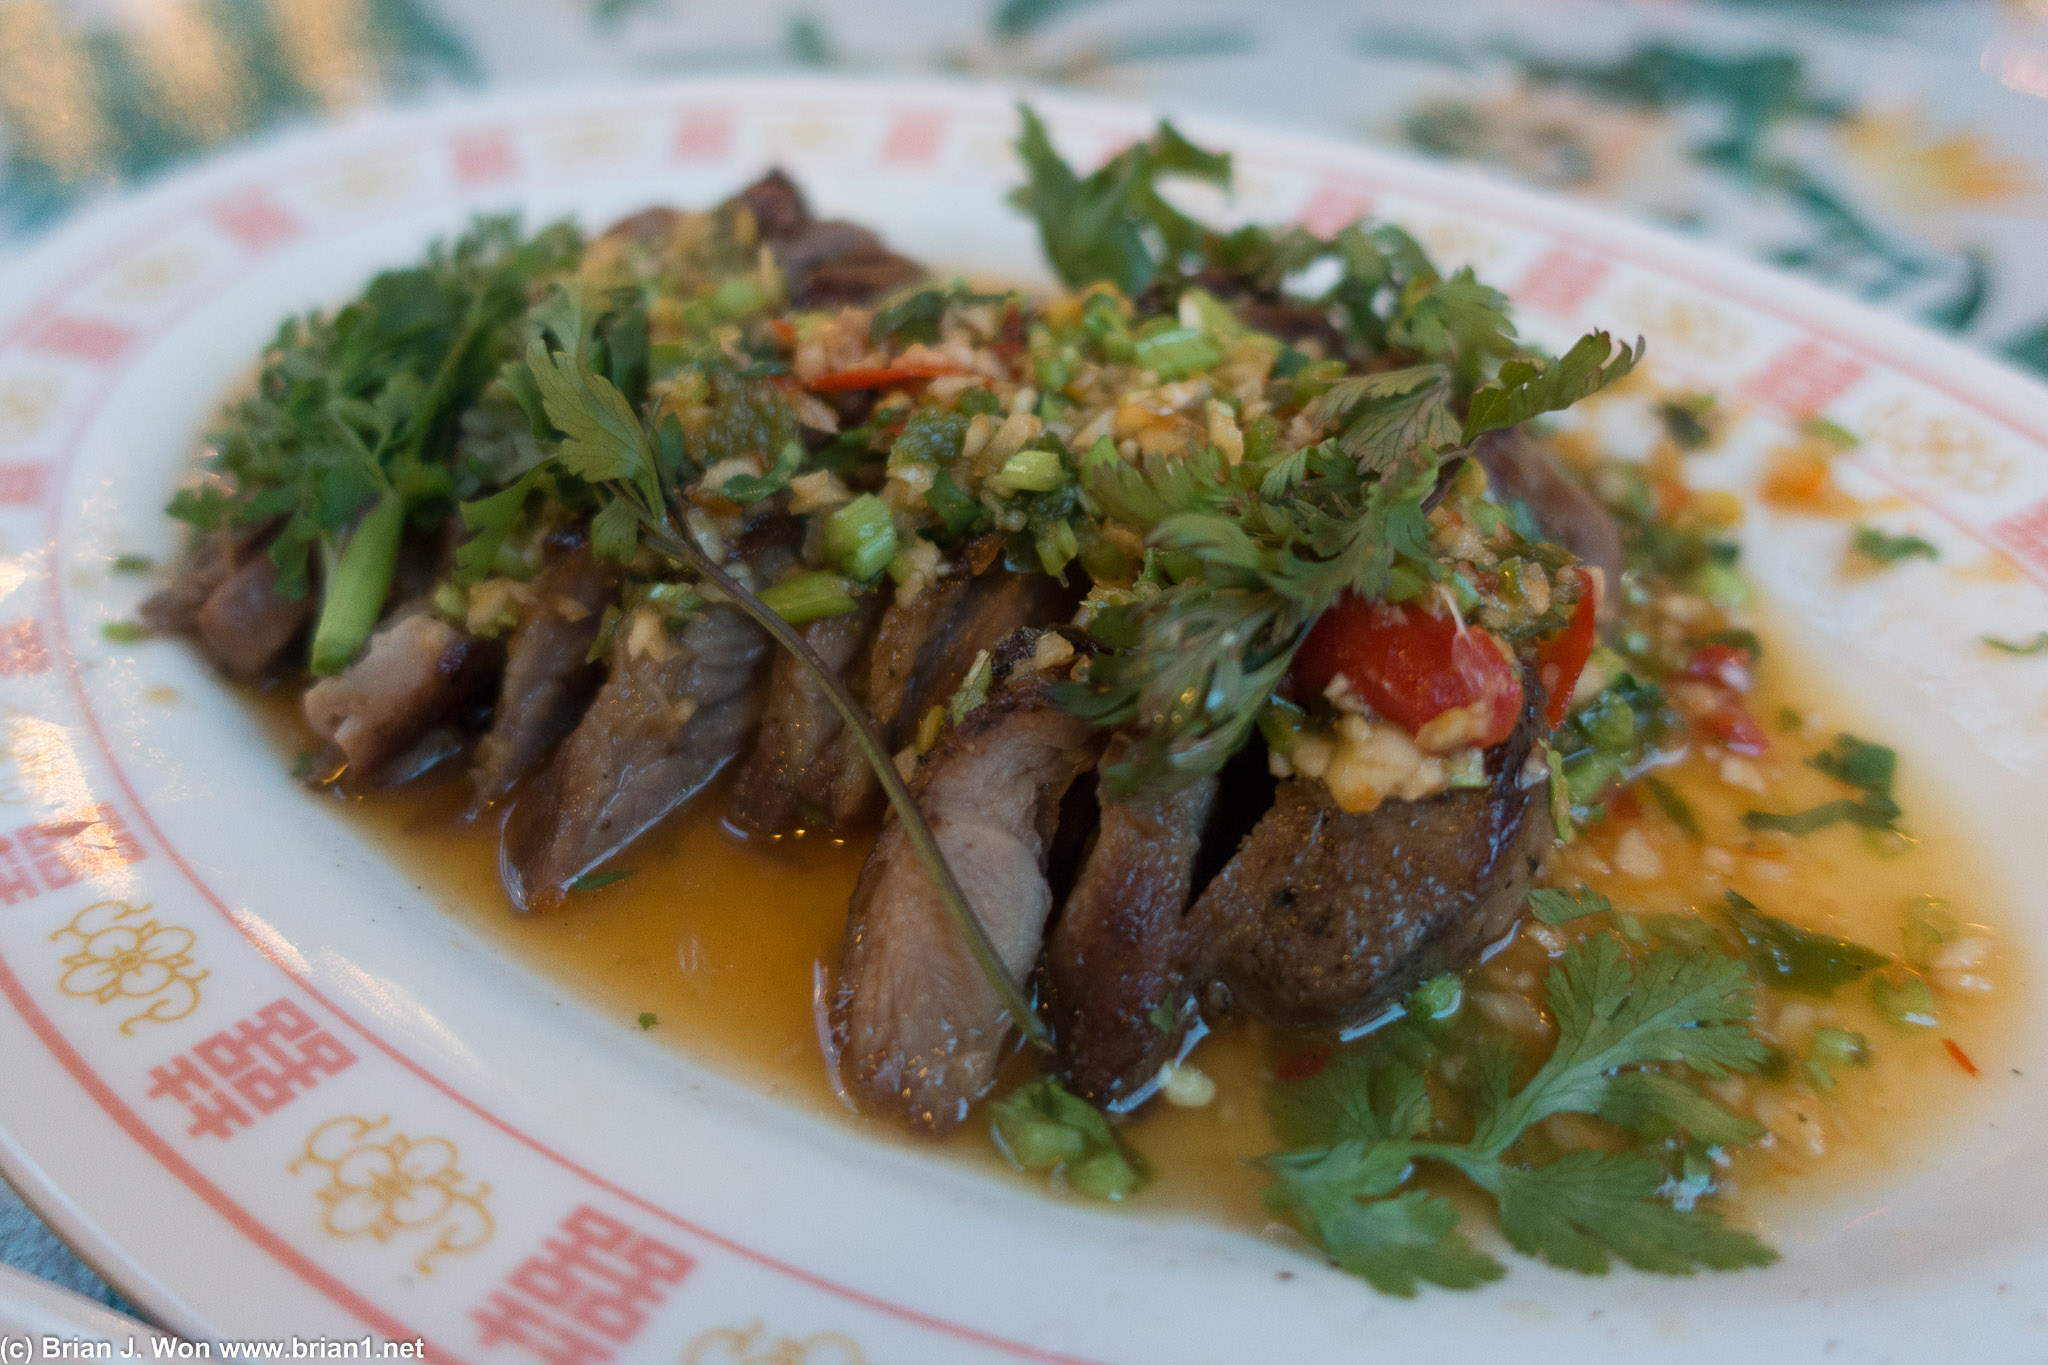 Muu Paa Kham Waan (boar collar meat, served with iced mustard greens on a separate plate).